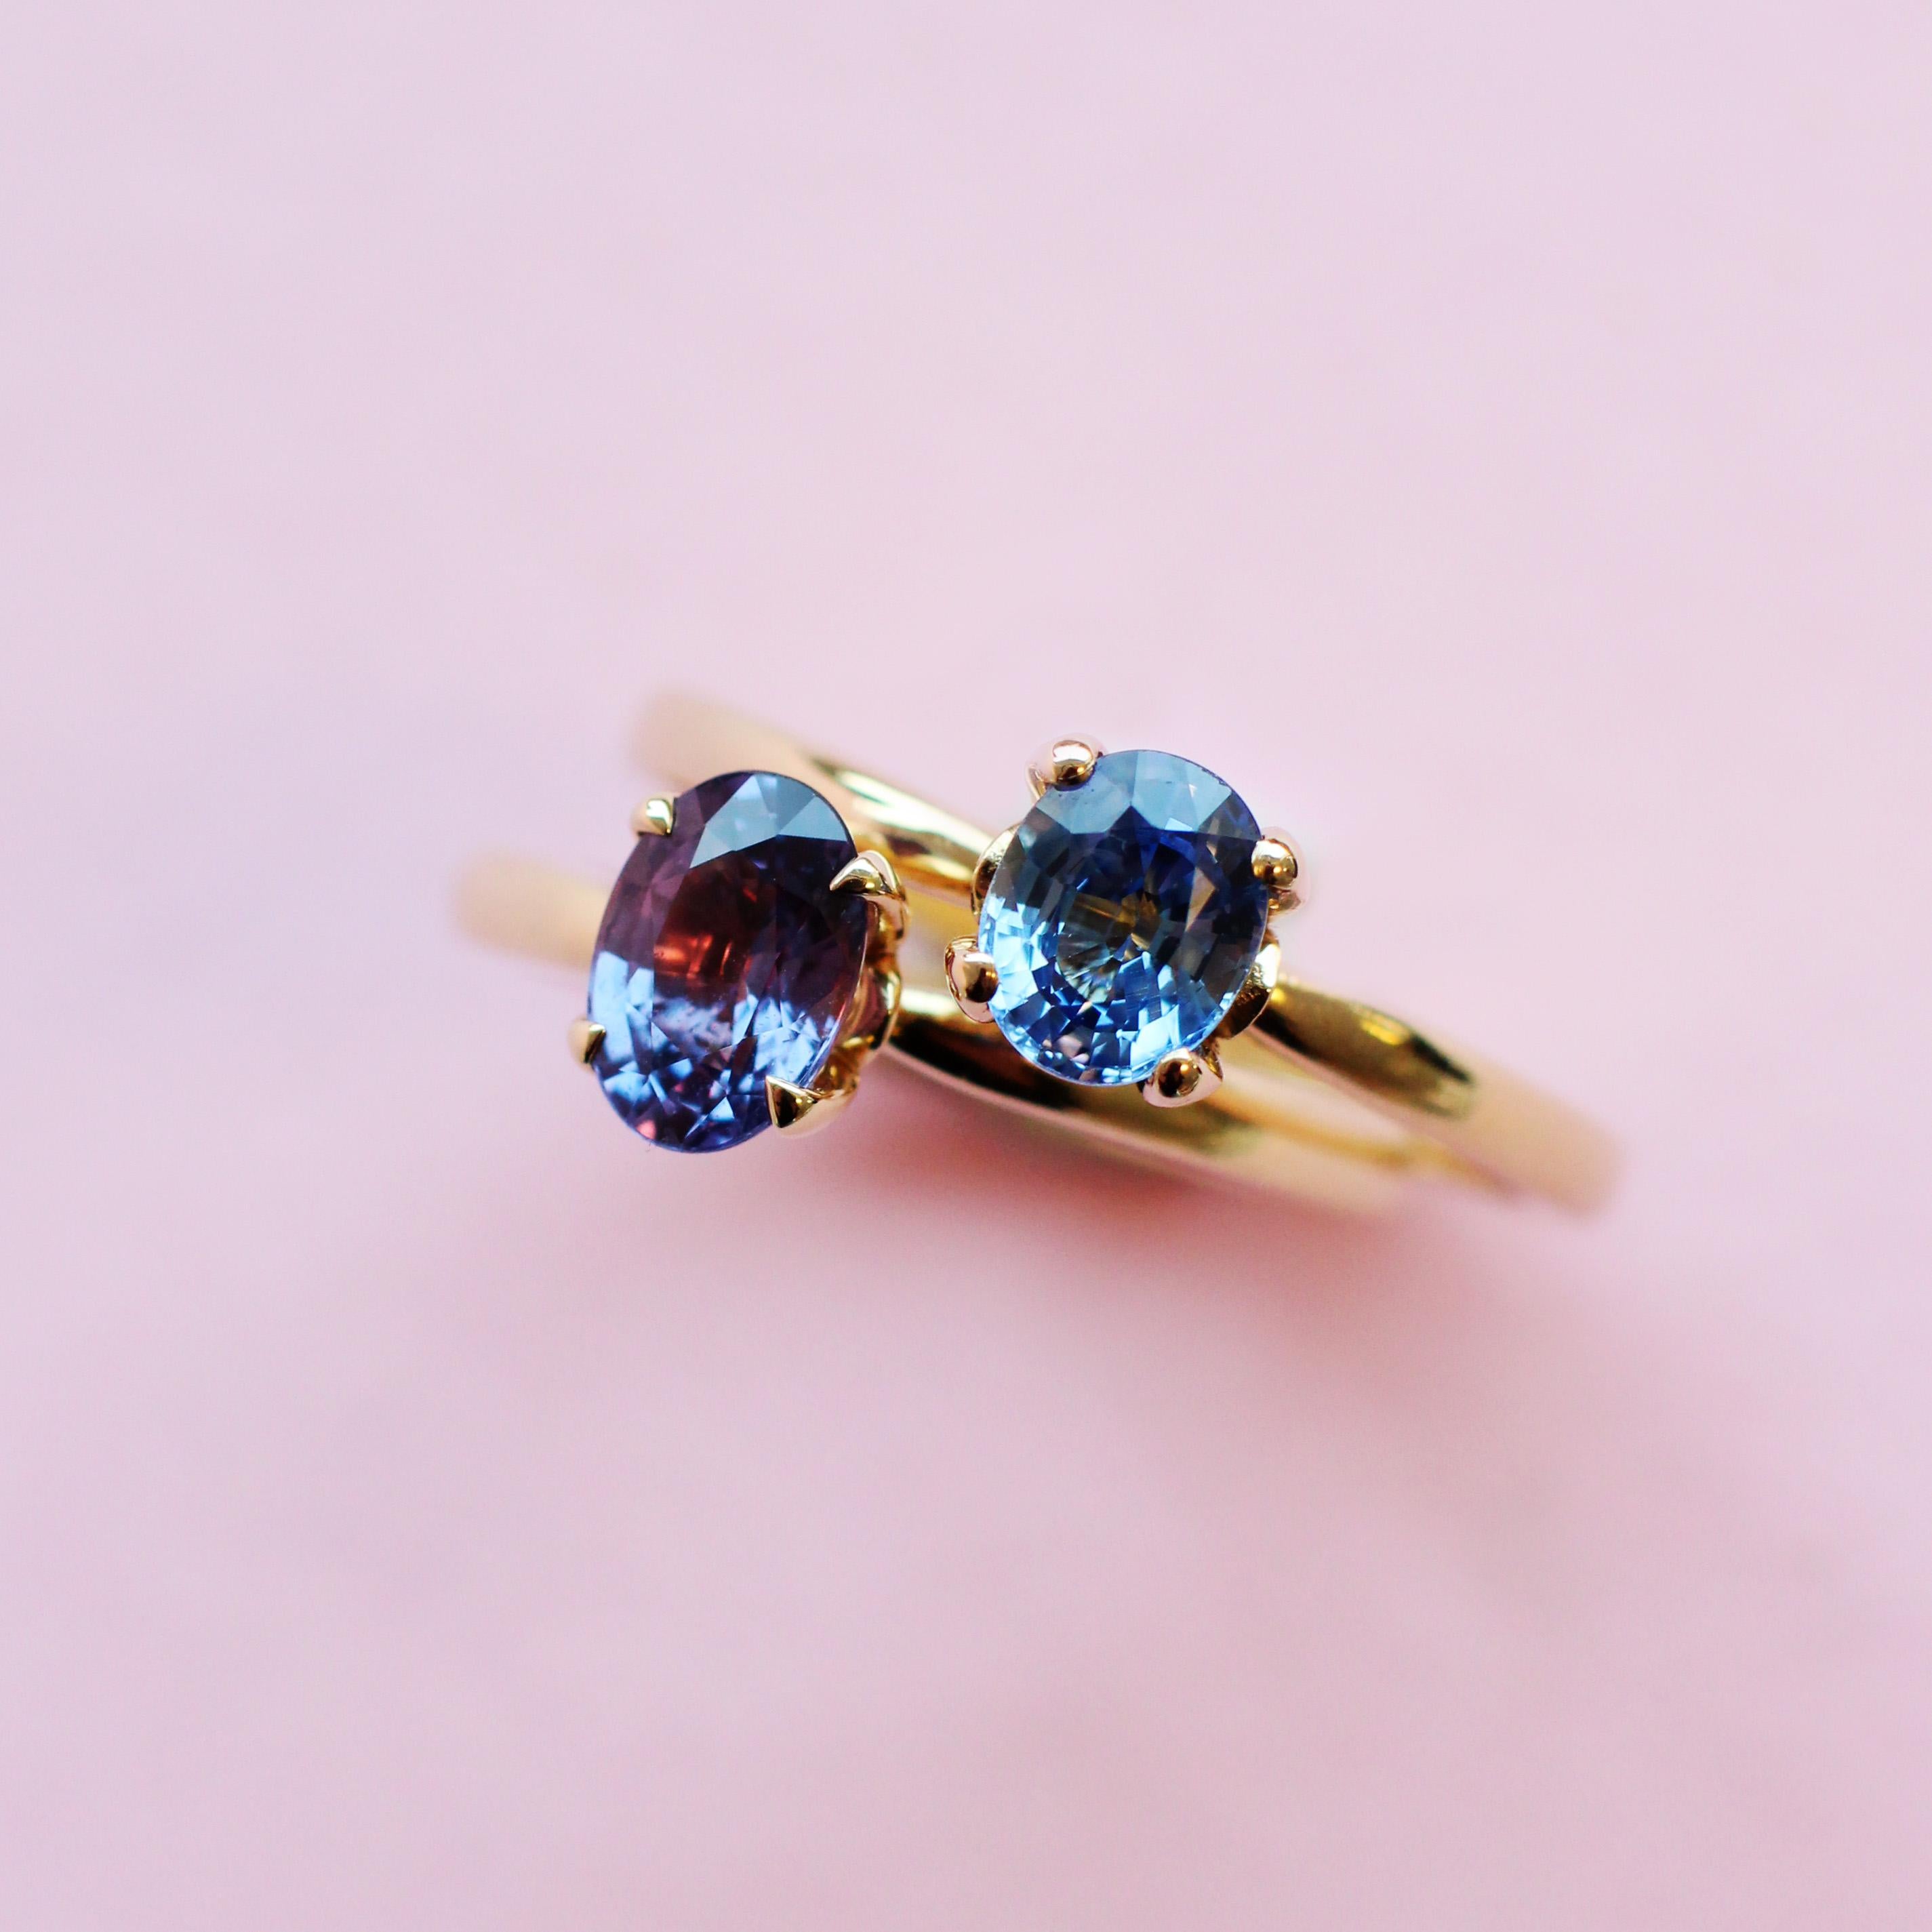 For Sale:  Blue Sapphire Solitaire Ring in 18 Karat Yellow Gold 7